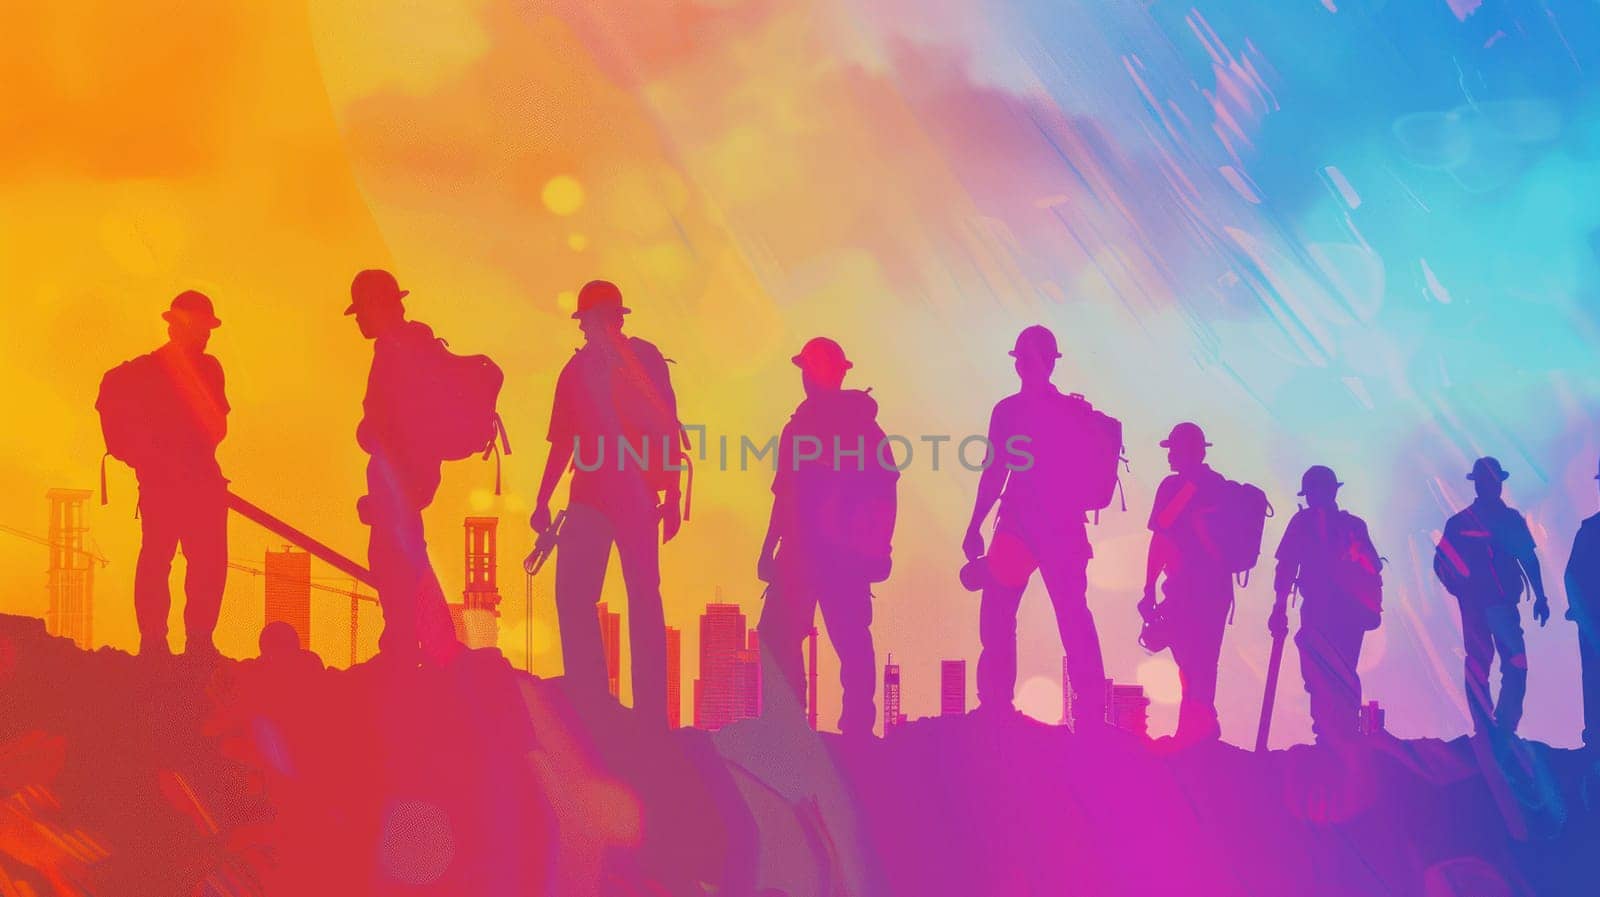 A group of men are standing on a hill, with a city in the background. The men are wearing backpacks and helmets, and they are all looking in the same direction. Concept of unity and teamwork